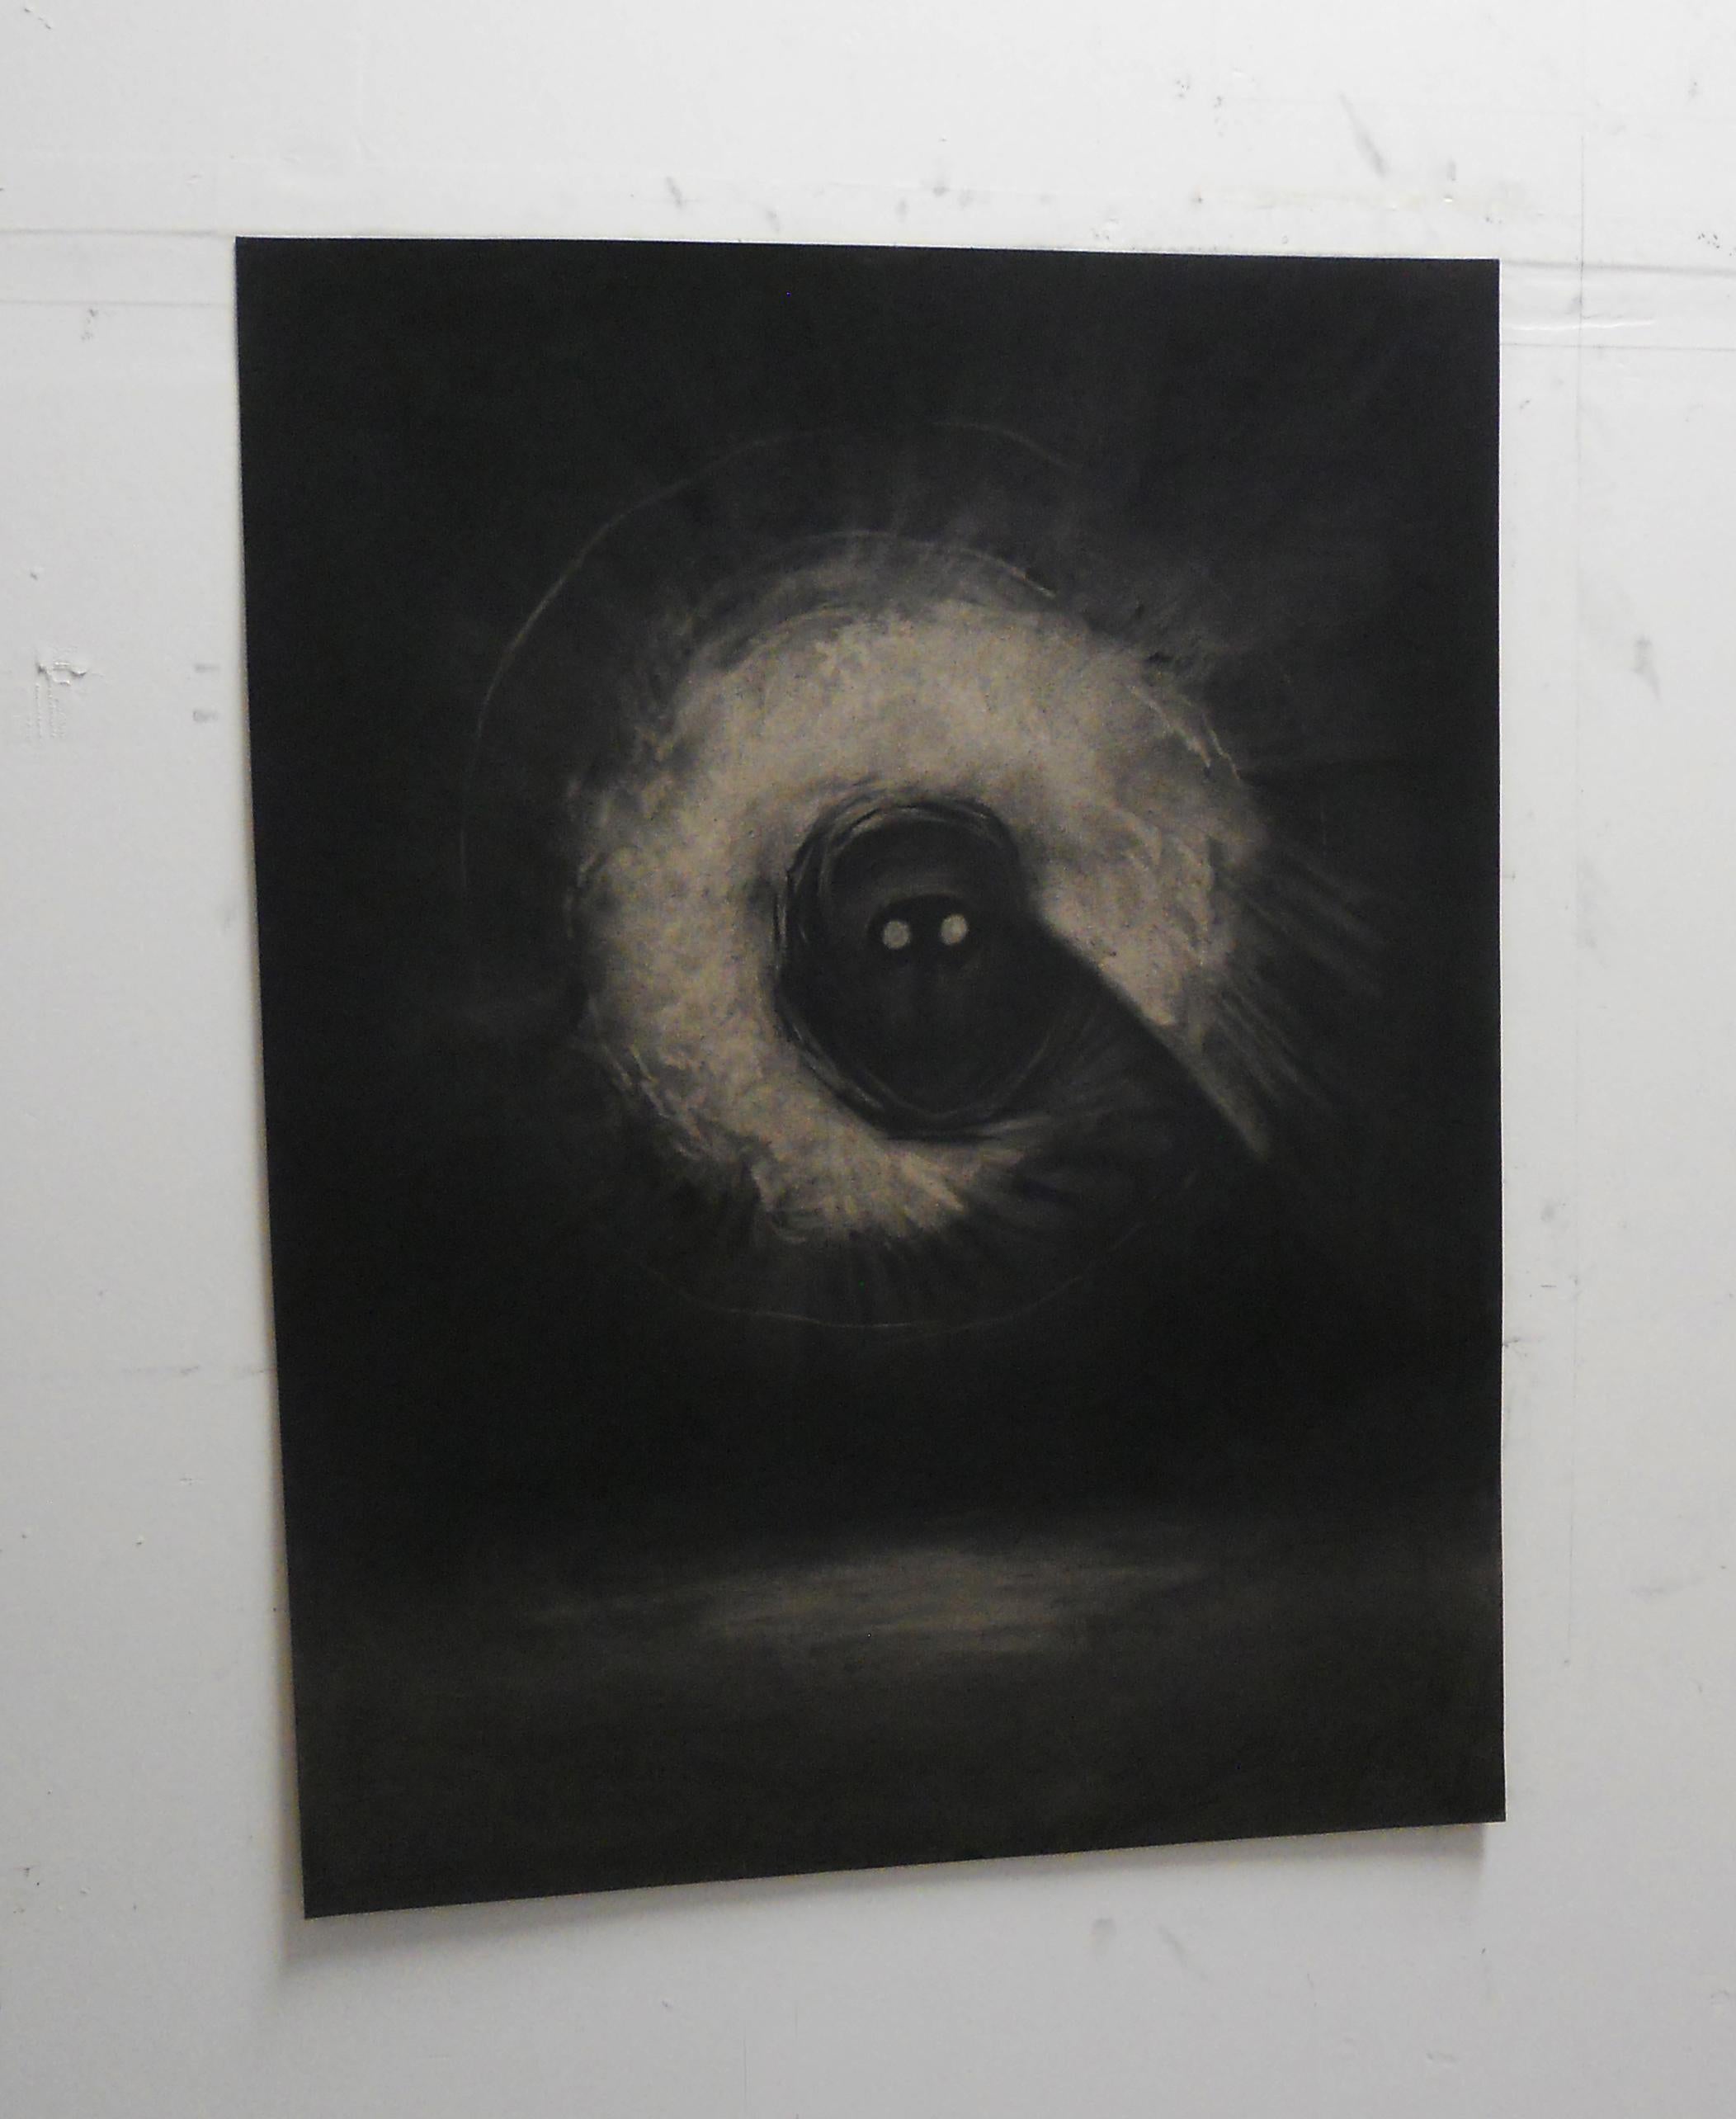 <p>Artist Comments<br> I am inspired by the paranormal and the supernatural. In this piece I wanted to depict an otherworldly being or visitor from another plane. I gave this being an abstract quality that would render it both recognizable as an